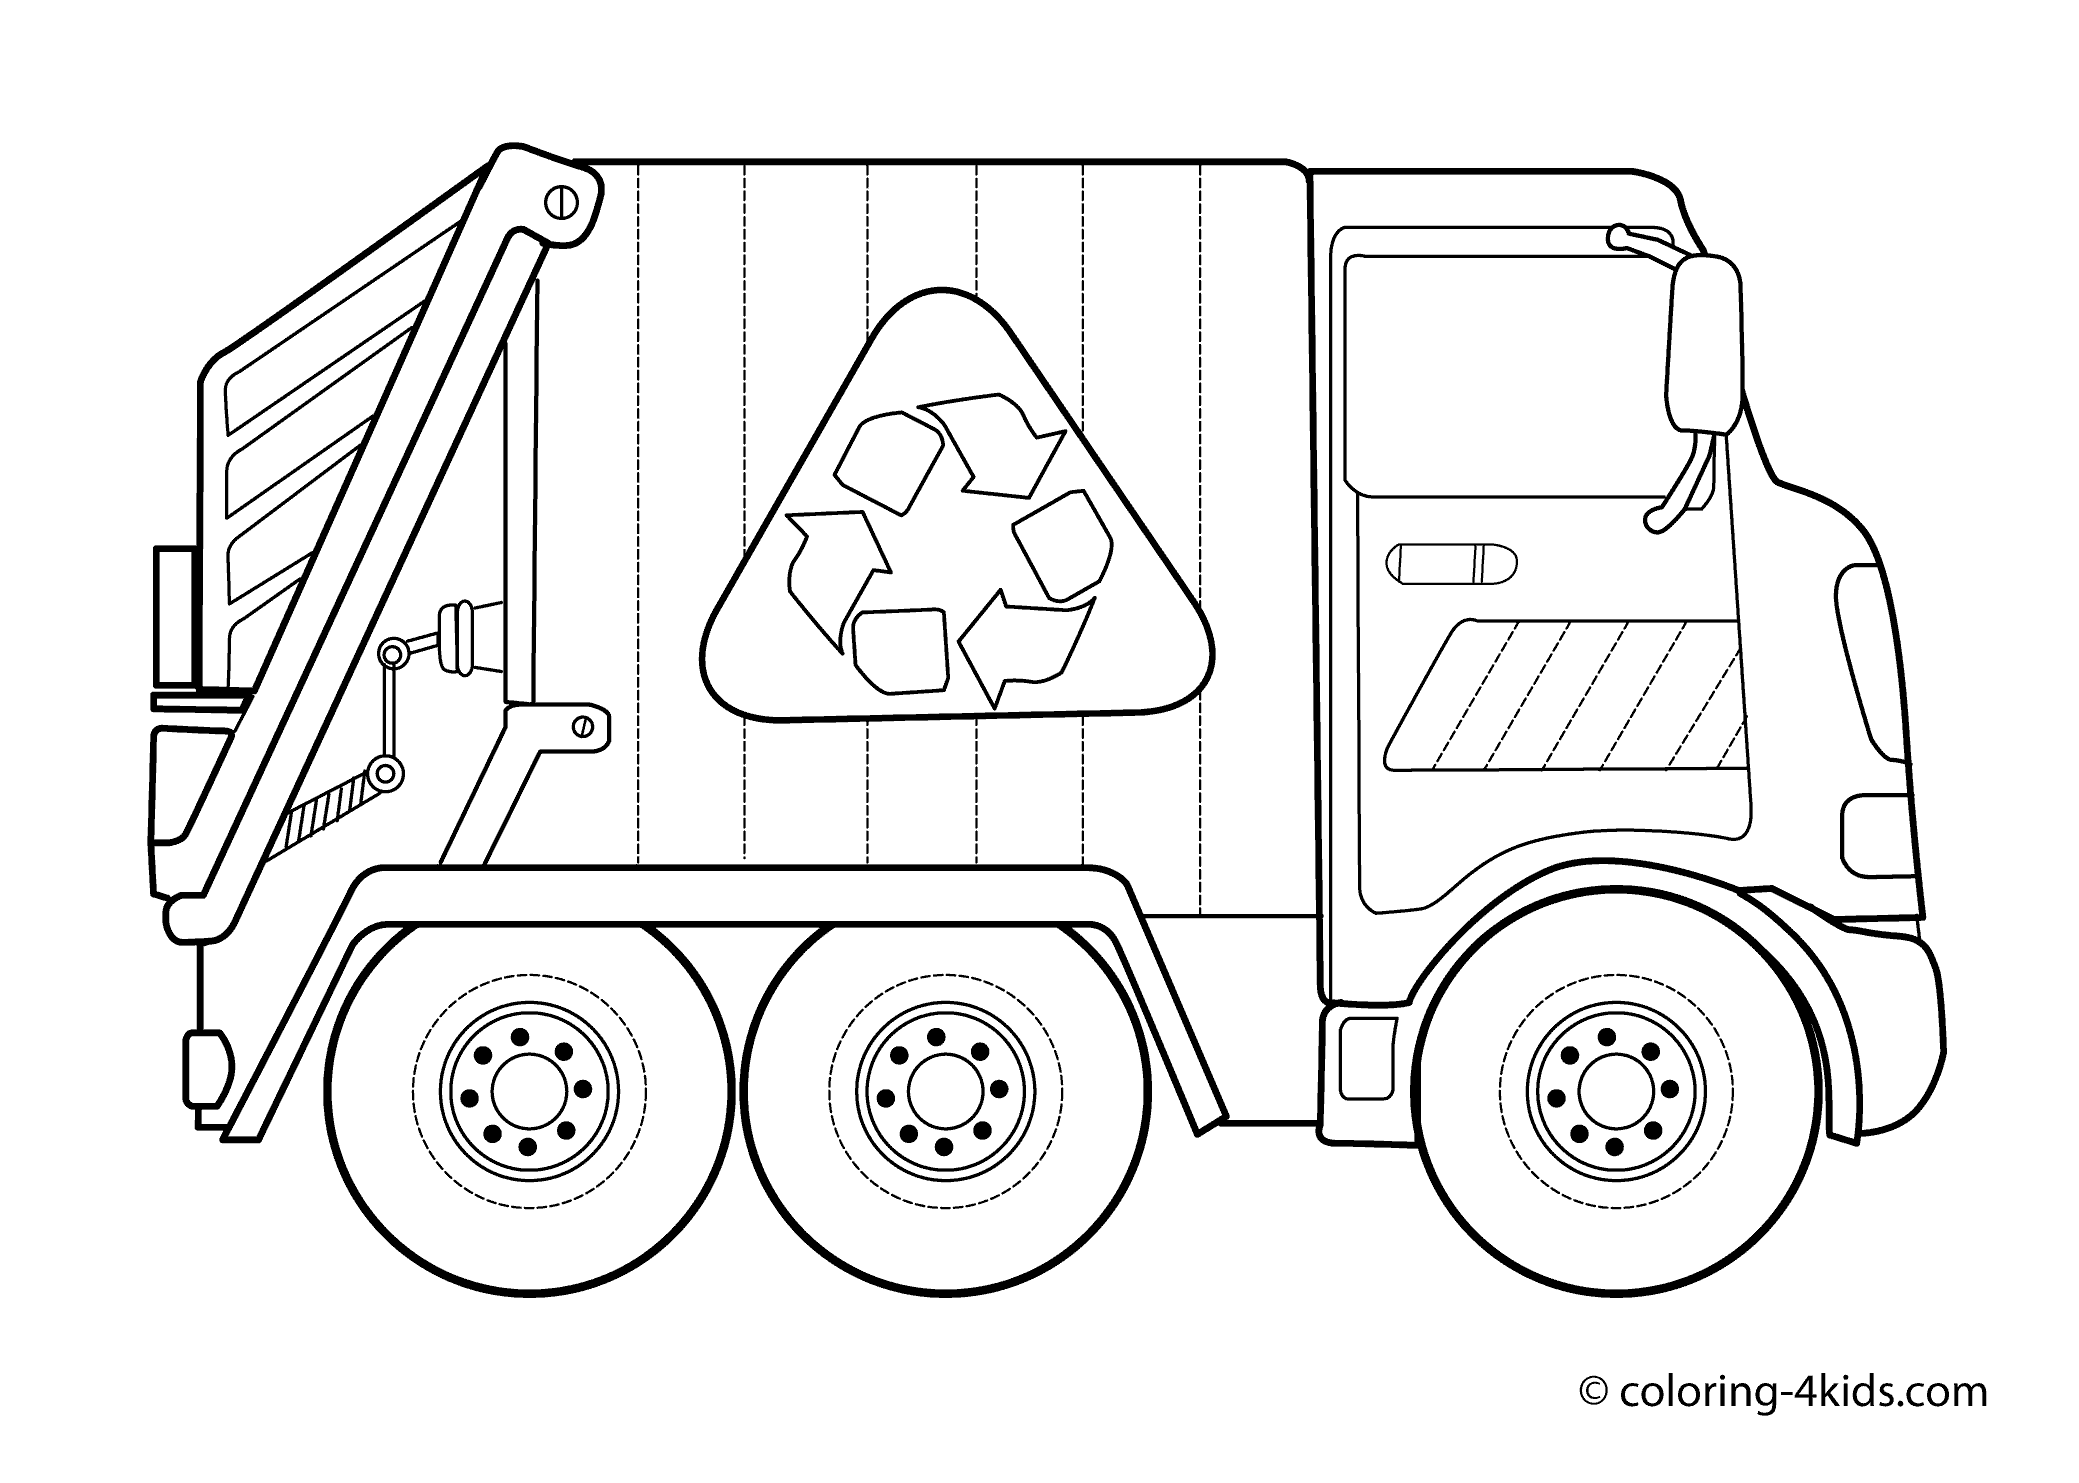 Free Truck Drawing For Kids, Download Free Truck Drawing For Kids png